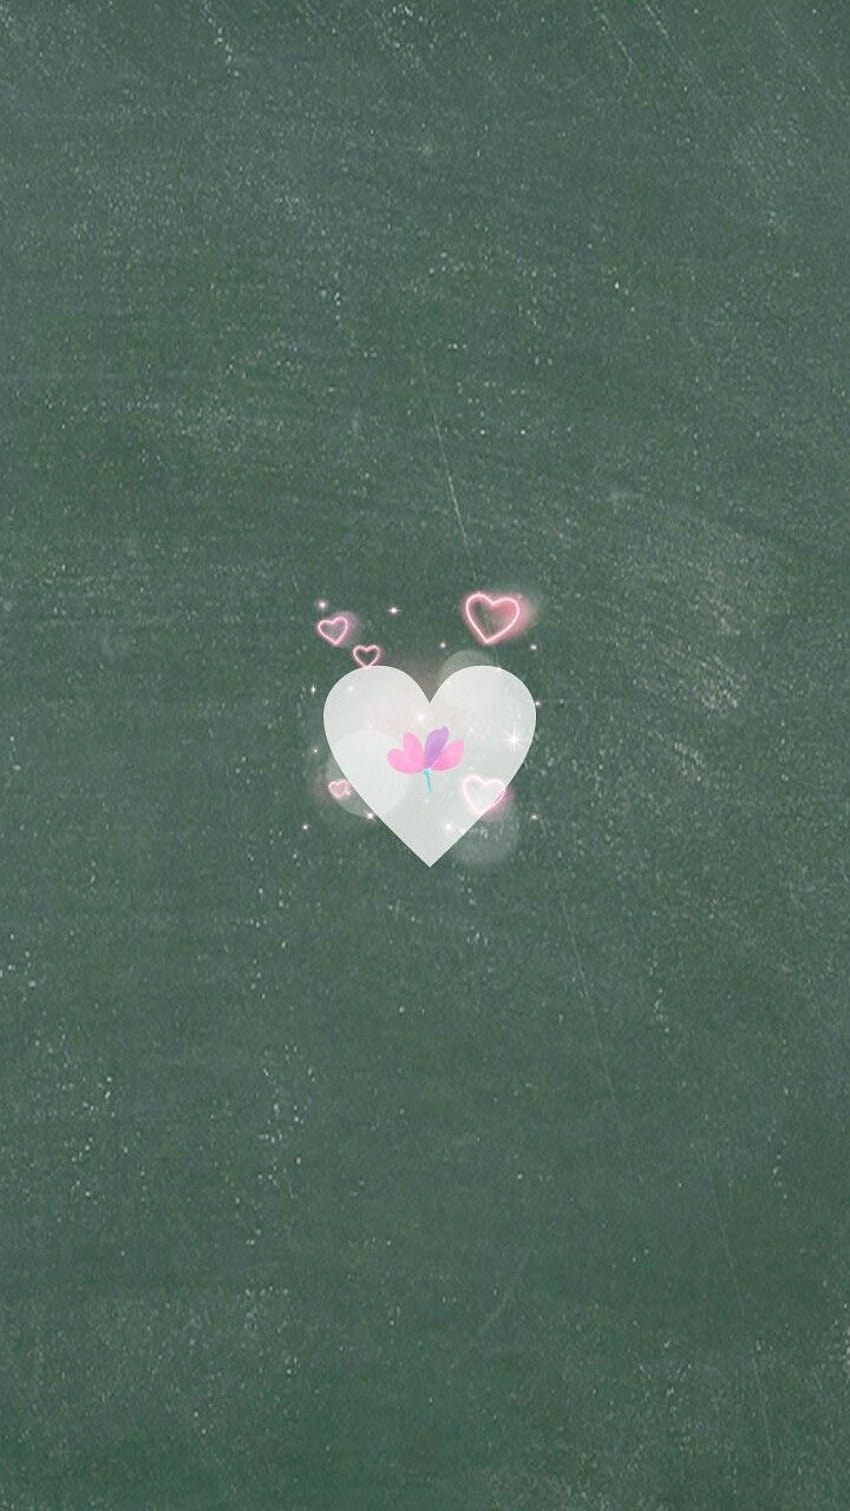 ❤, aesthetic army green HD phone wallpaper